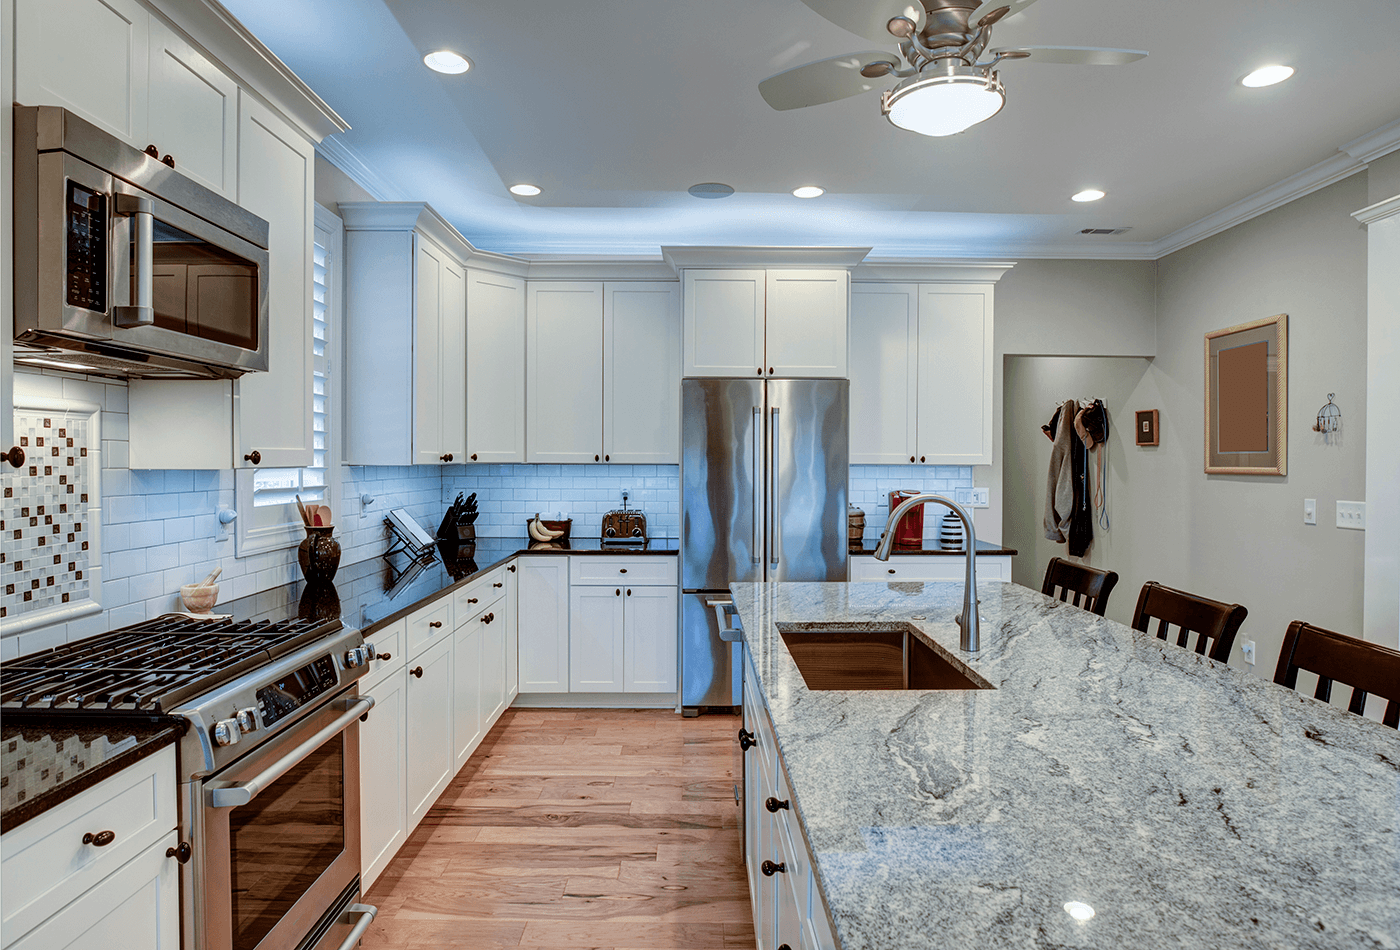 The Difference Between Granite and Man-Made Stone - Marble Concepts